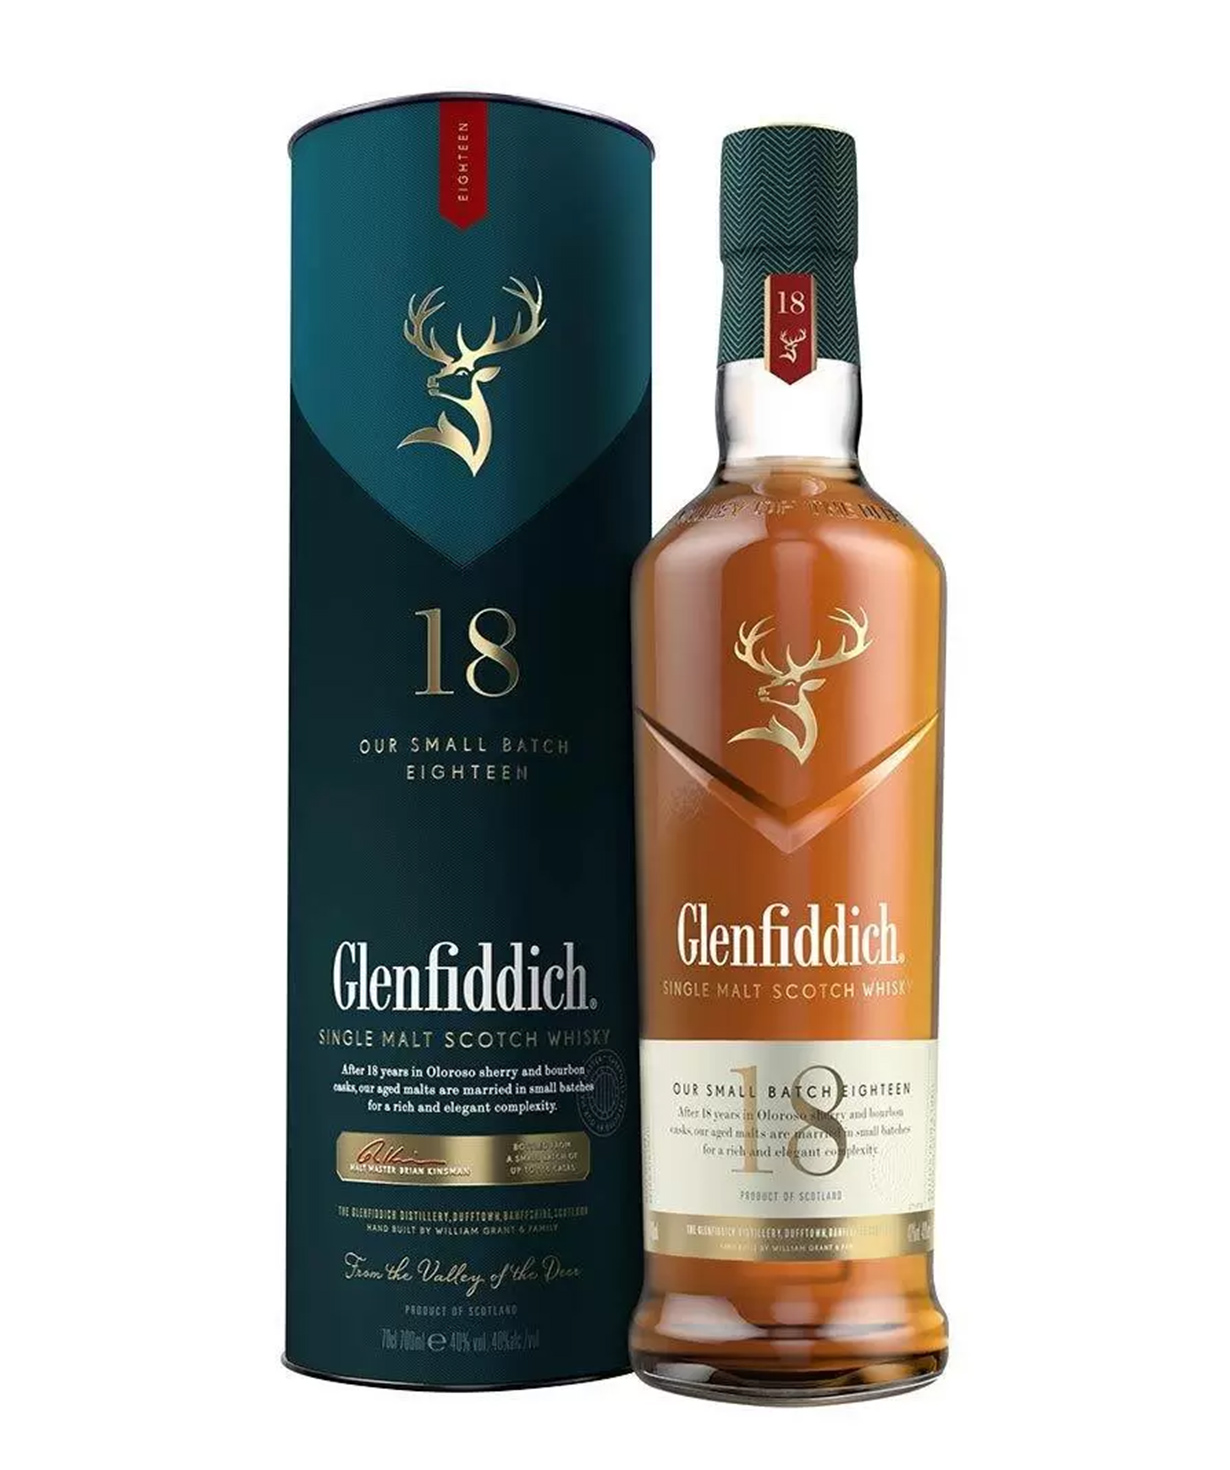 Whisky Glenfiddich 18 Years 0.7l